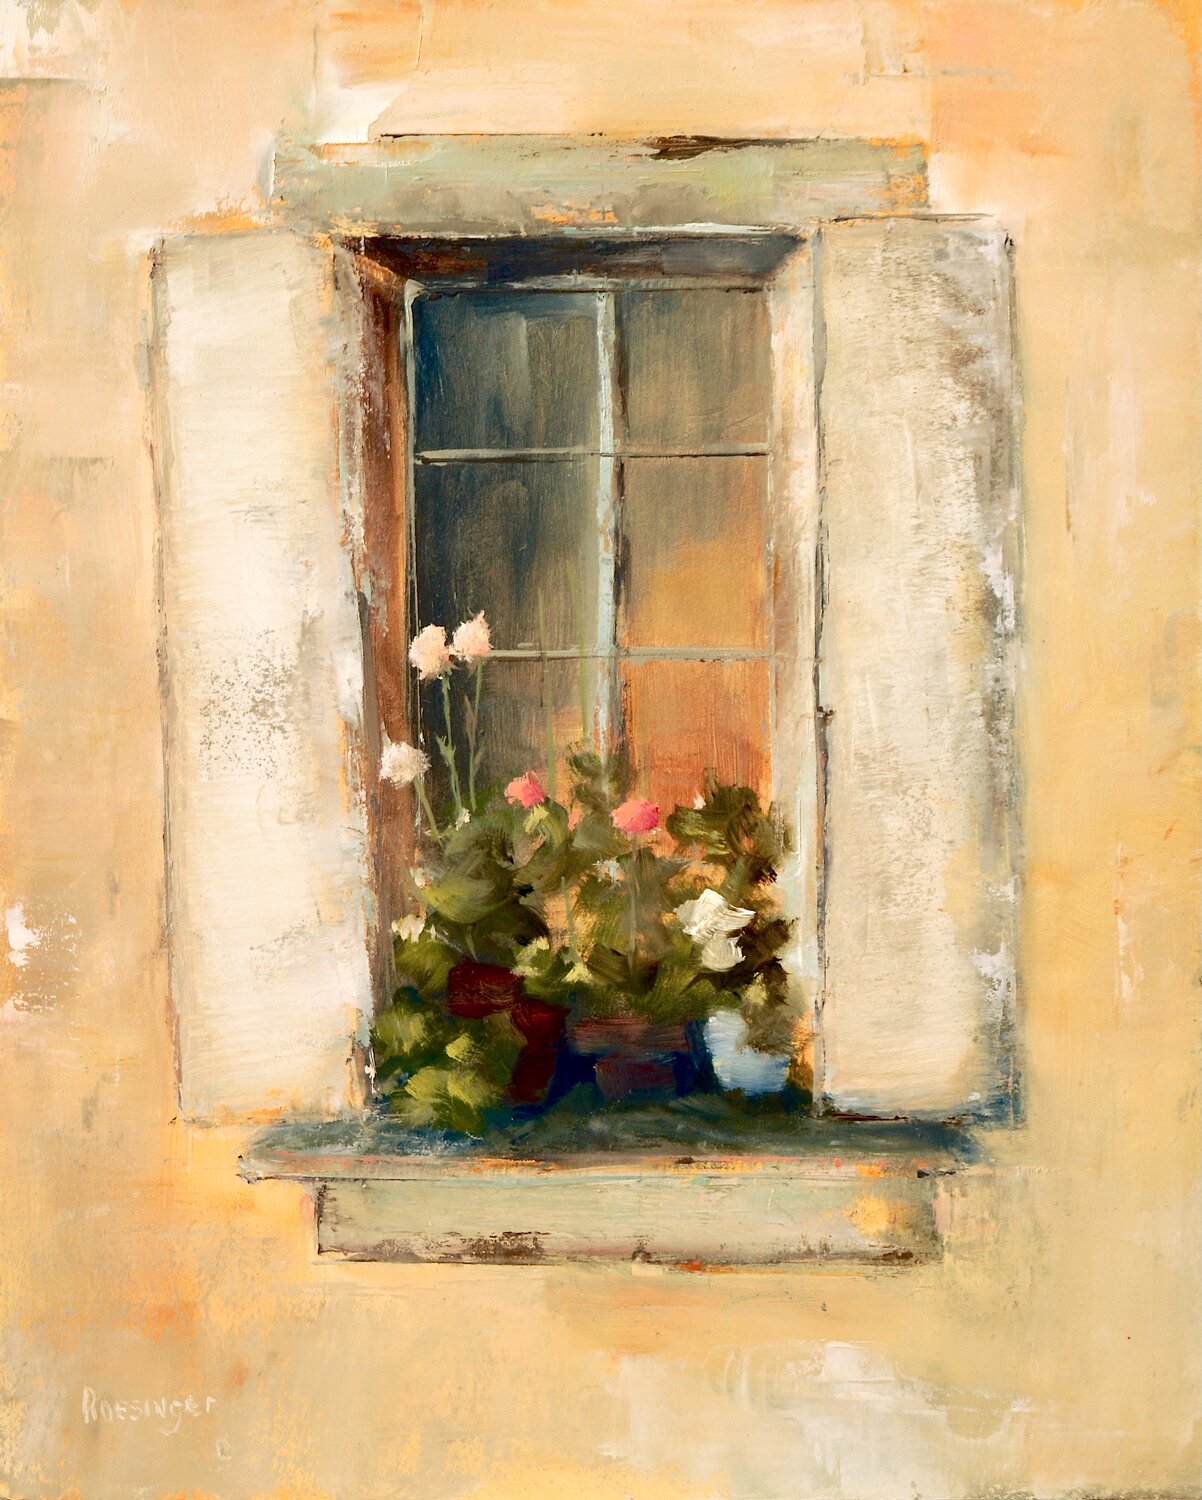 "Window Flowers" is by Cindy Roesinger.